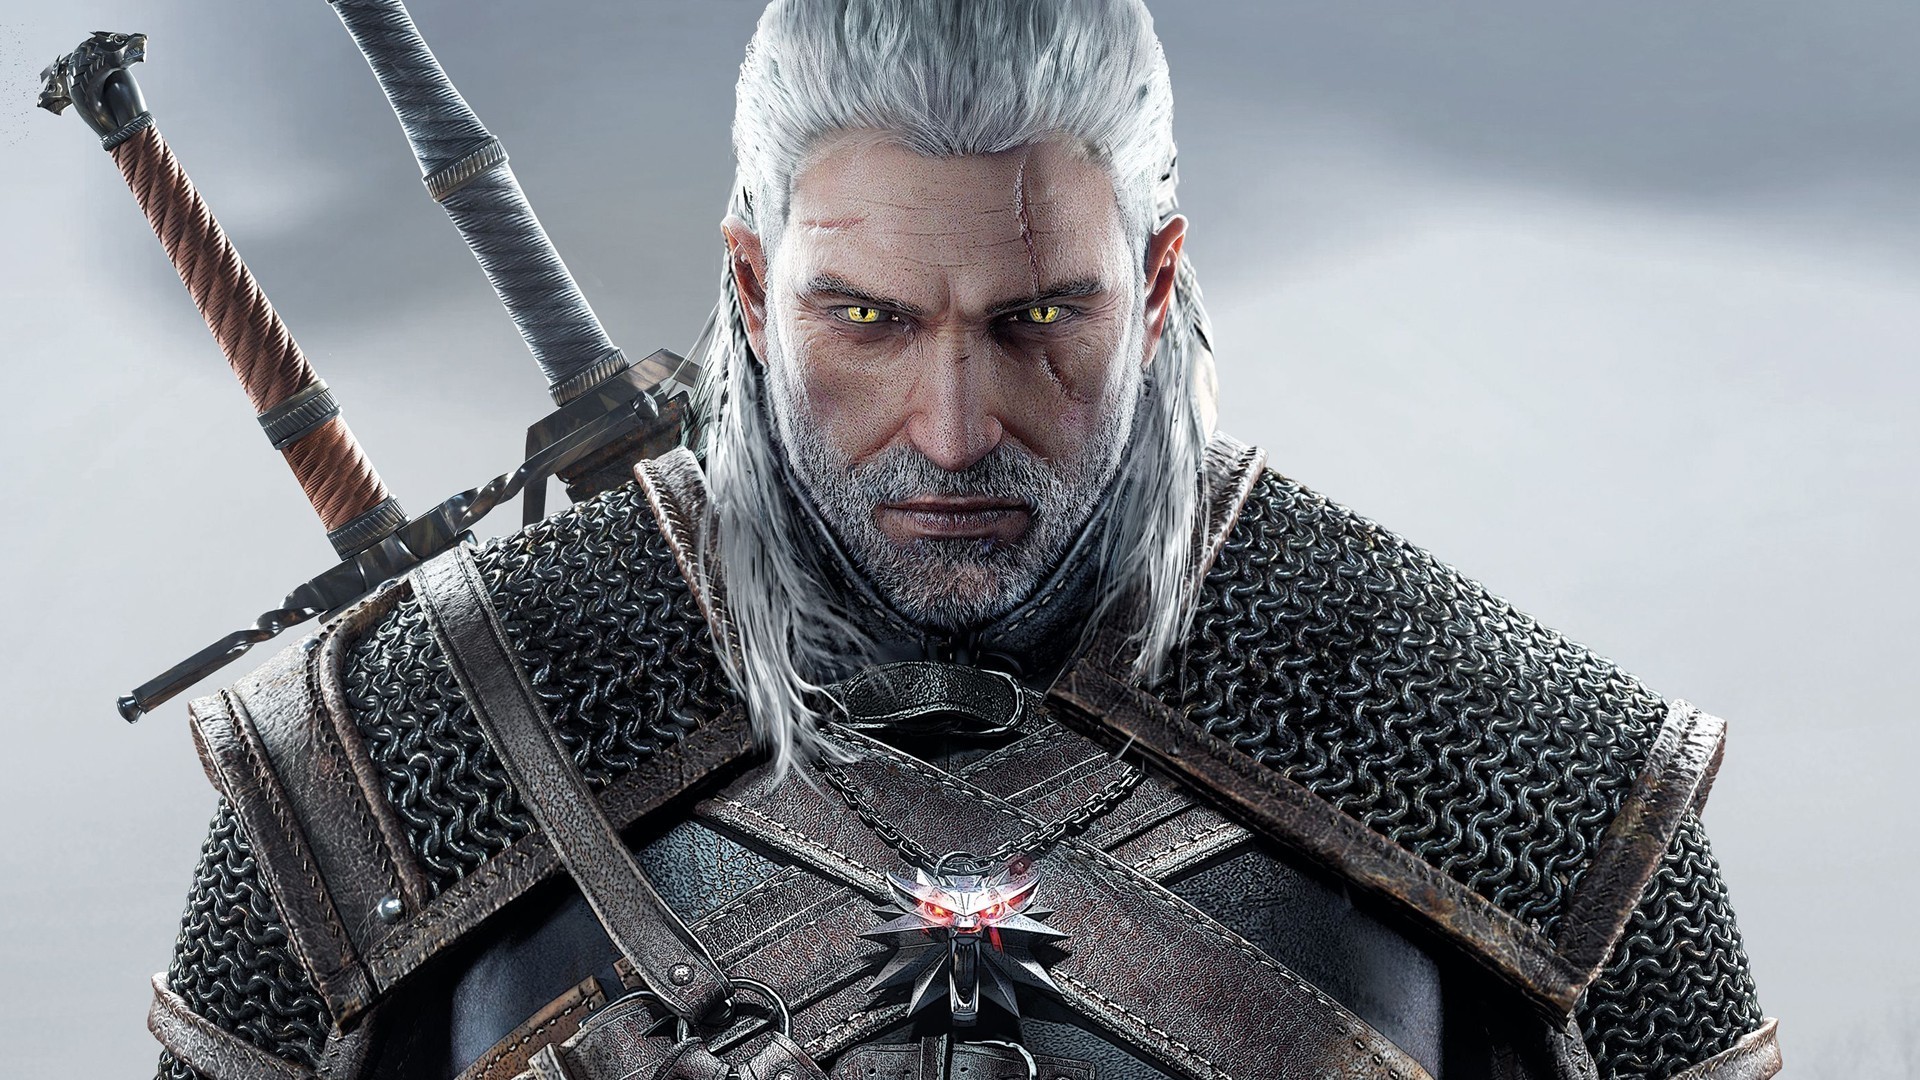 The Witcher 3: Wild Hunt - Complete Edition - PlayStation 5